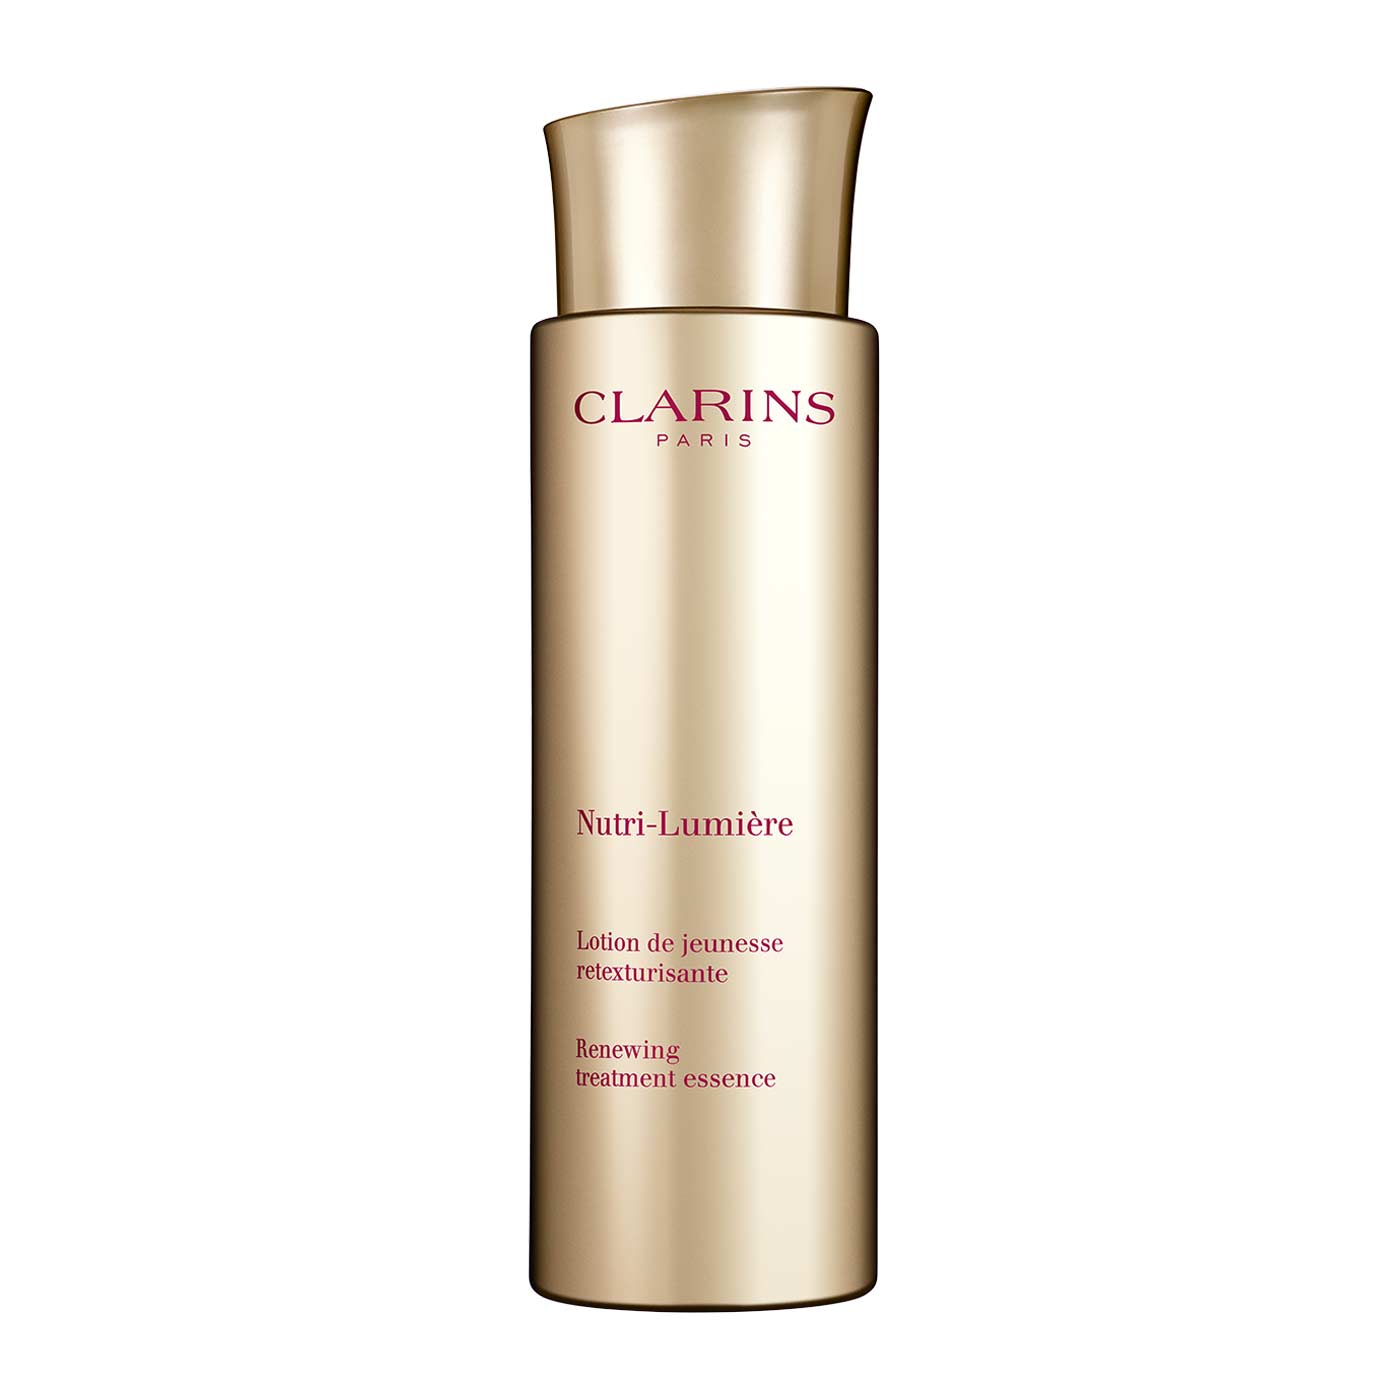 Clarins V Shaping Facial Lift Tightening & Anti-Puffiness Eye Concentrate, Skin Society